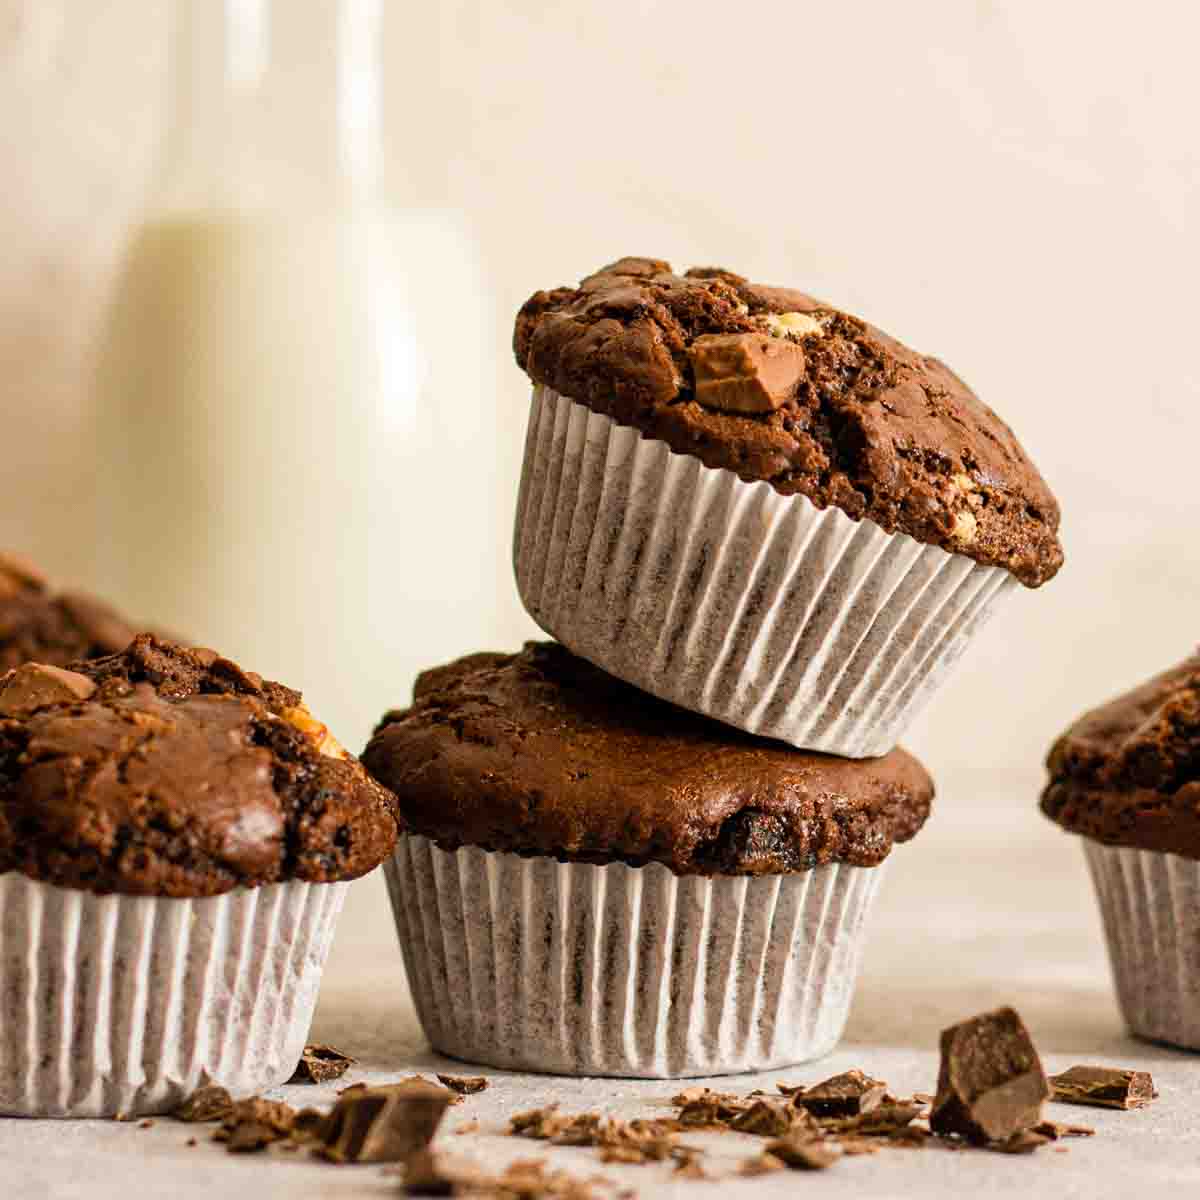 Triple chocolate muffins stacked on top of each other next to milk, muffins and chocolate.